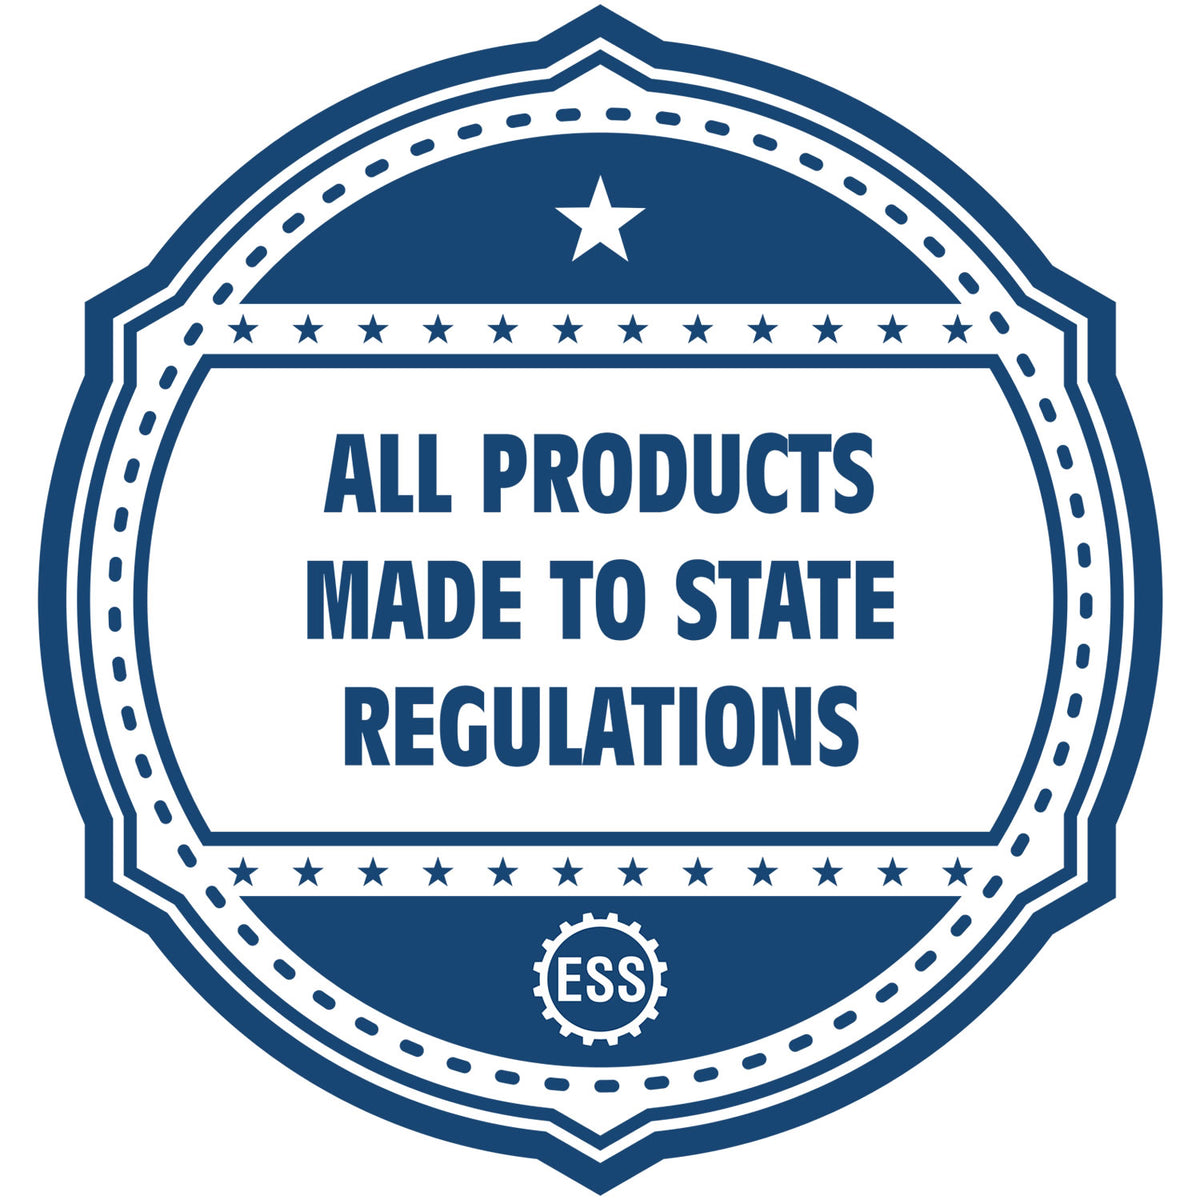 An icon or badge element for the PSI Virginia Notary Stamp showing that this product is made in compliance with state regulations.